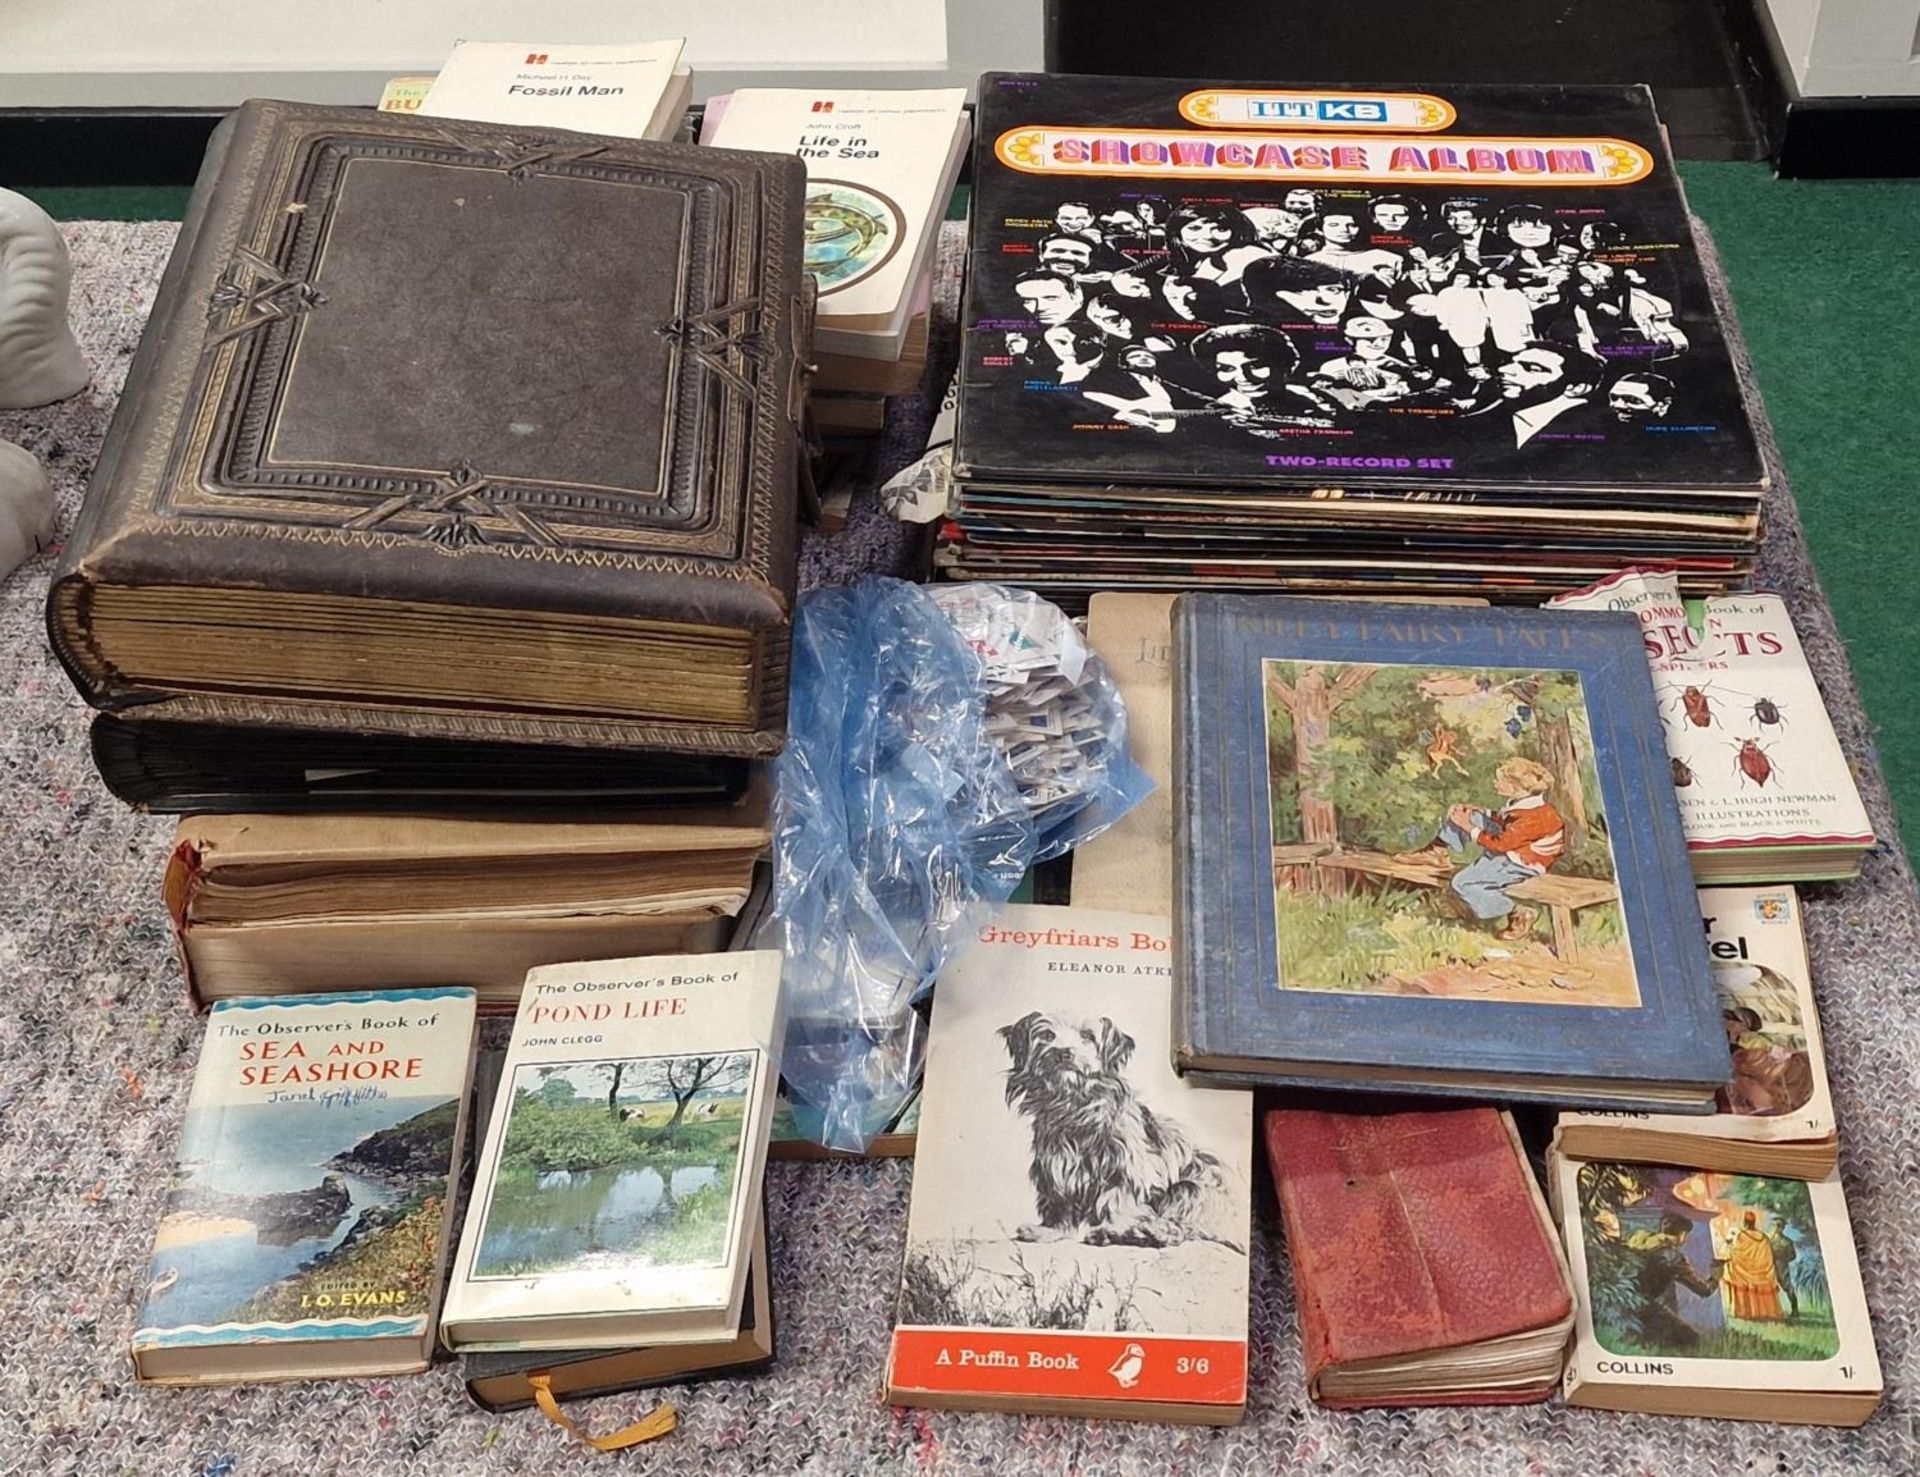 Large collection of vintage books, photographs and other ephemera together with some LP records.